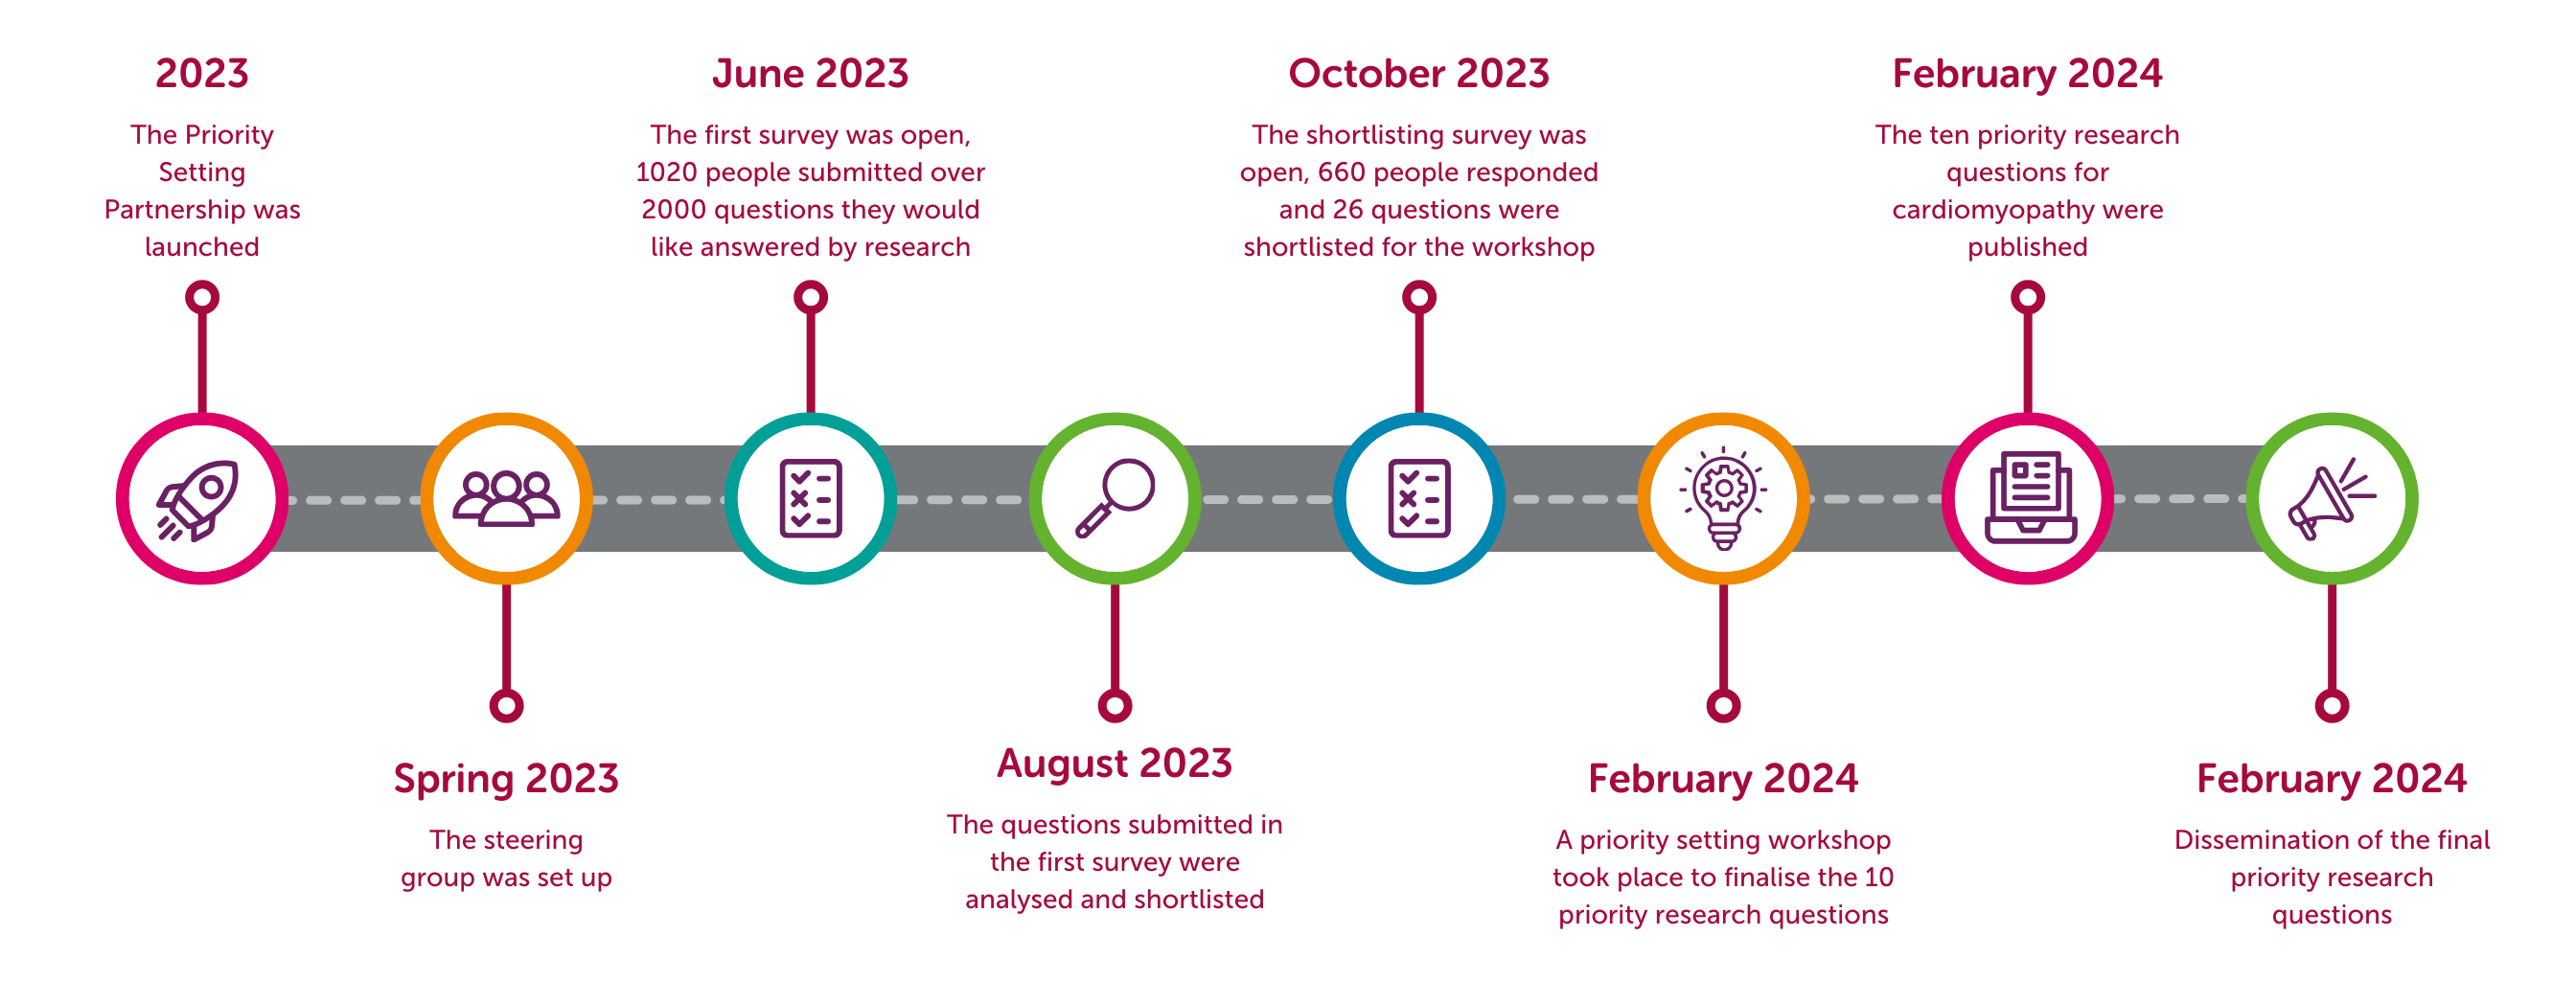 timeline of the PSP project